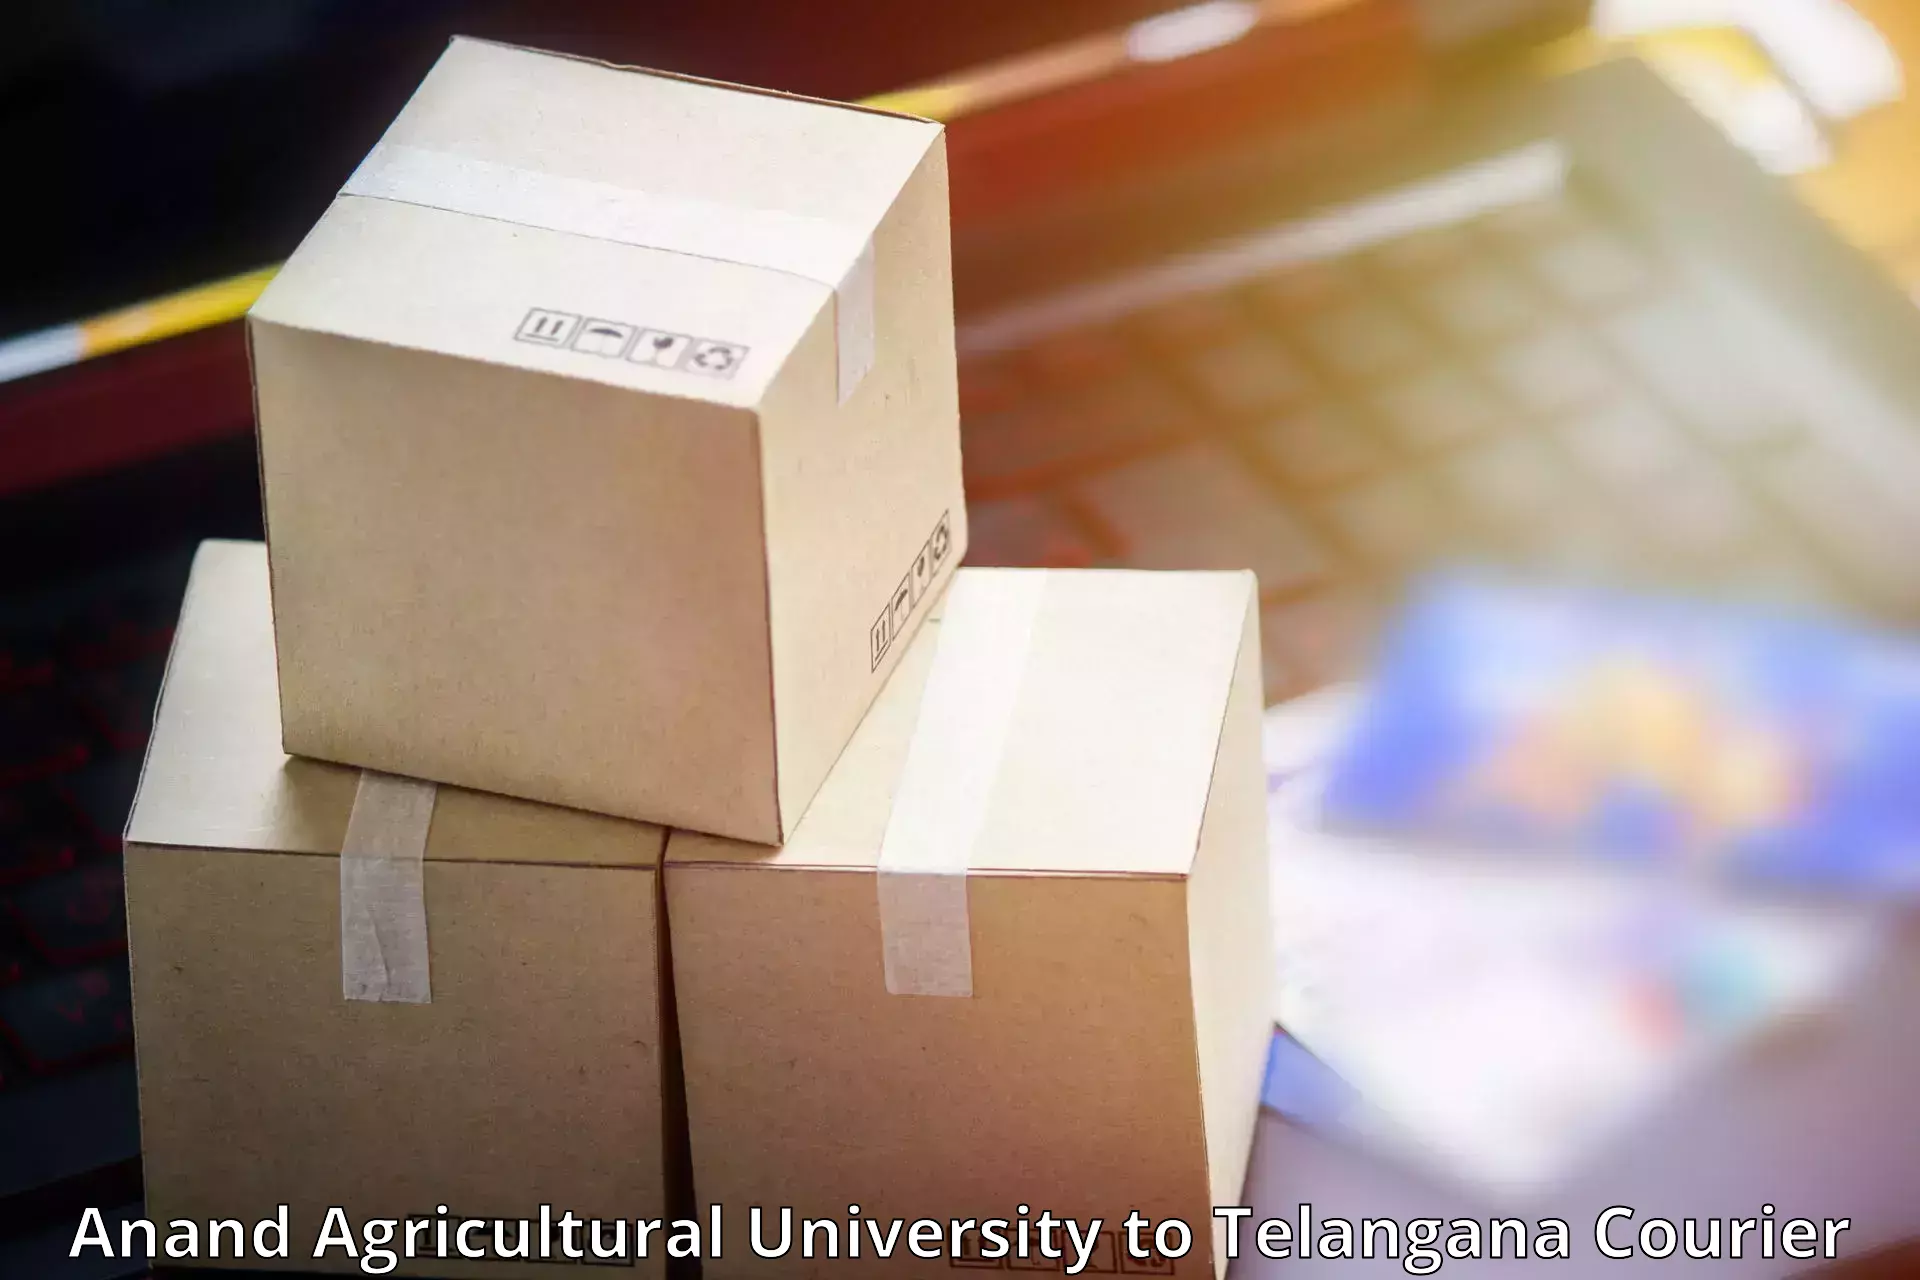 Smart shipping technology Anand Agricultural University to Vemulawada